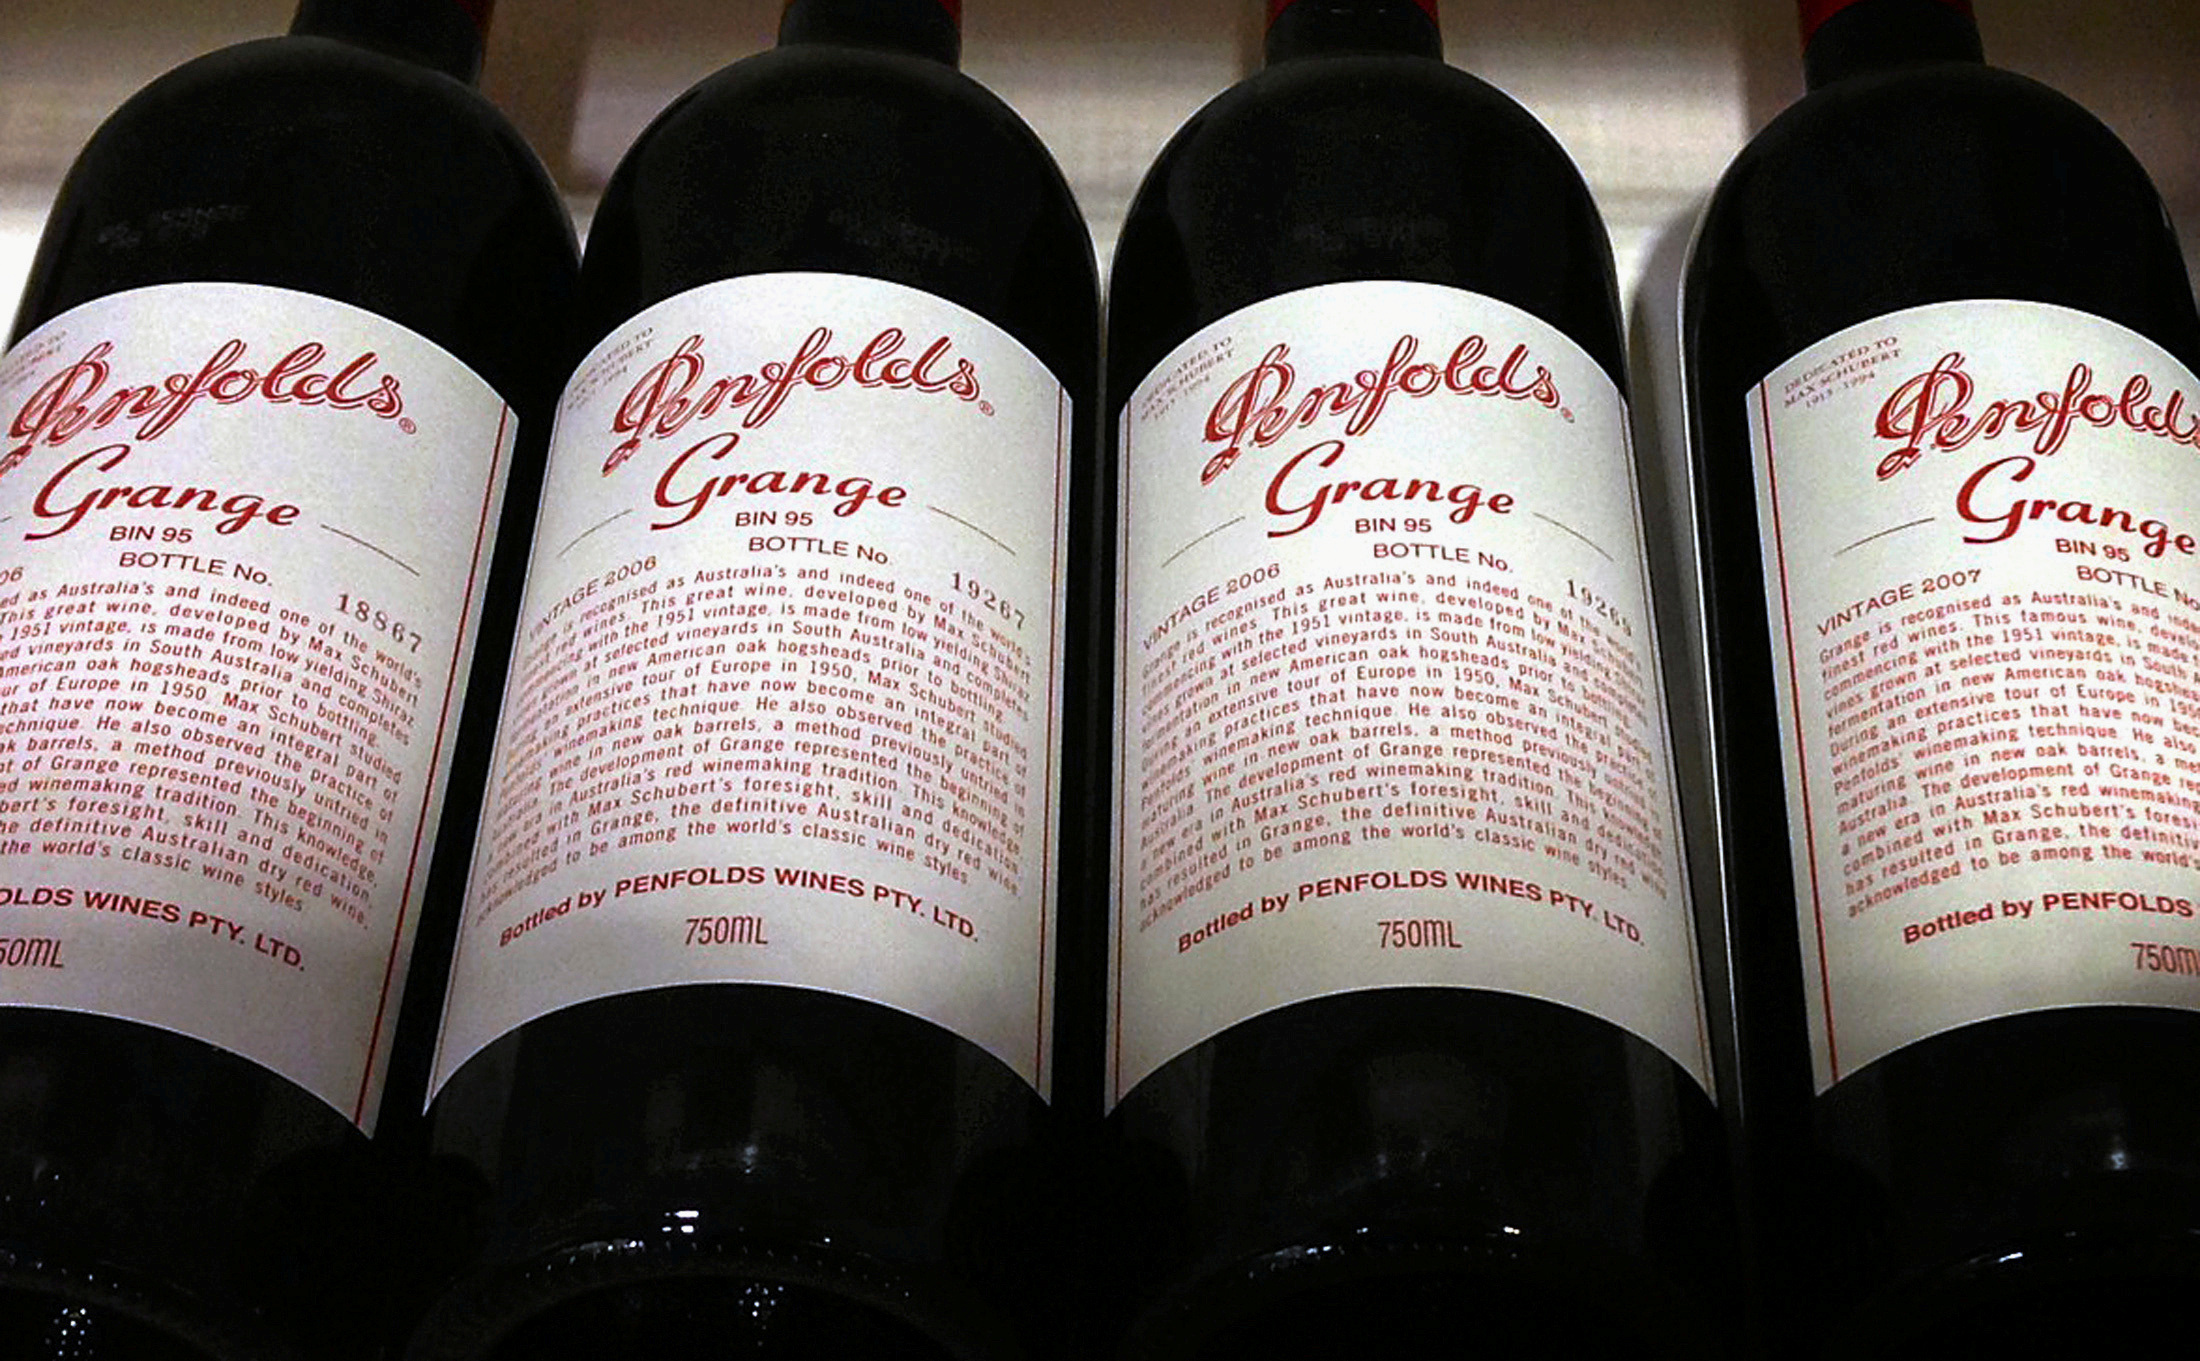 File photo of bottles of Penfolds Grange, made by Australian wine maker Penfolds and owned by Australia's Treasury Wine Estates, on a shelf for sale